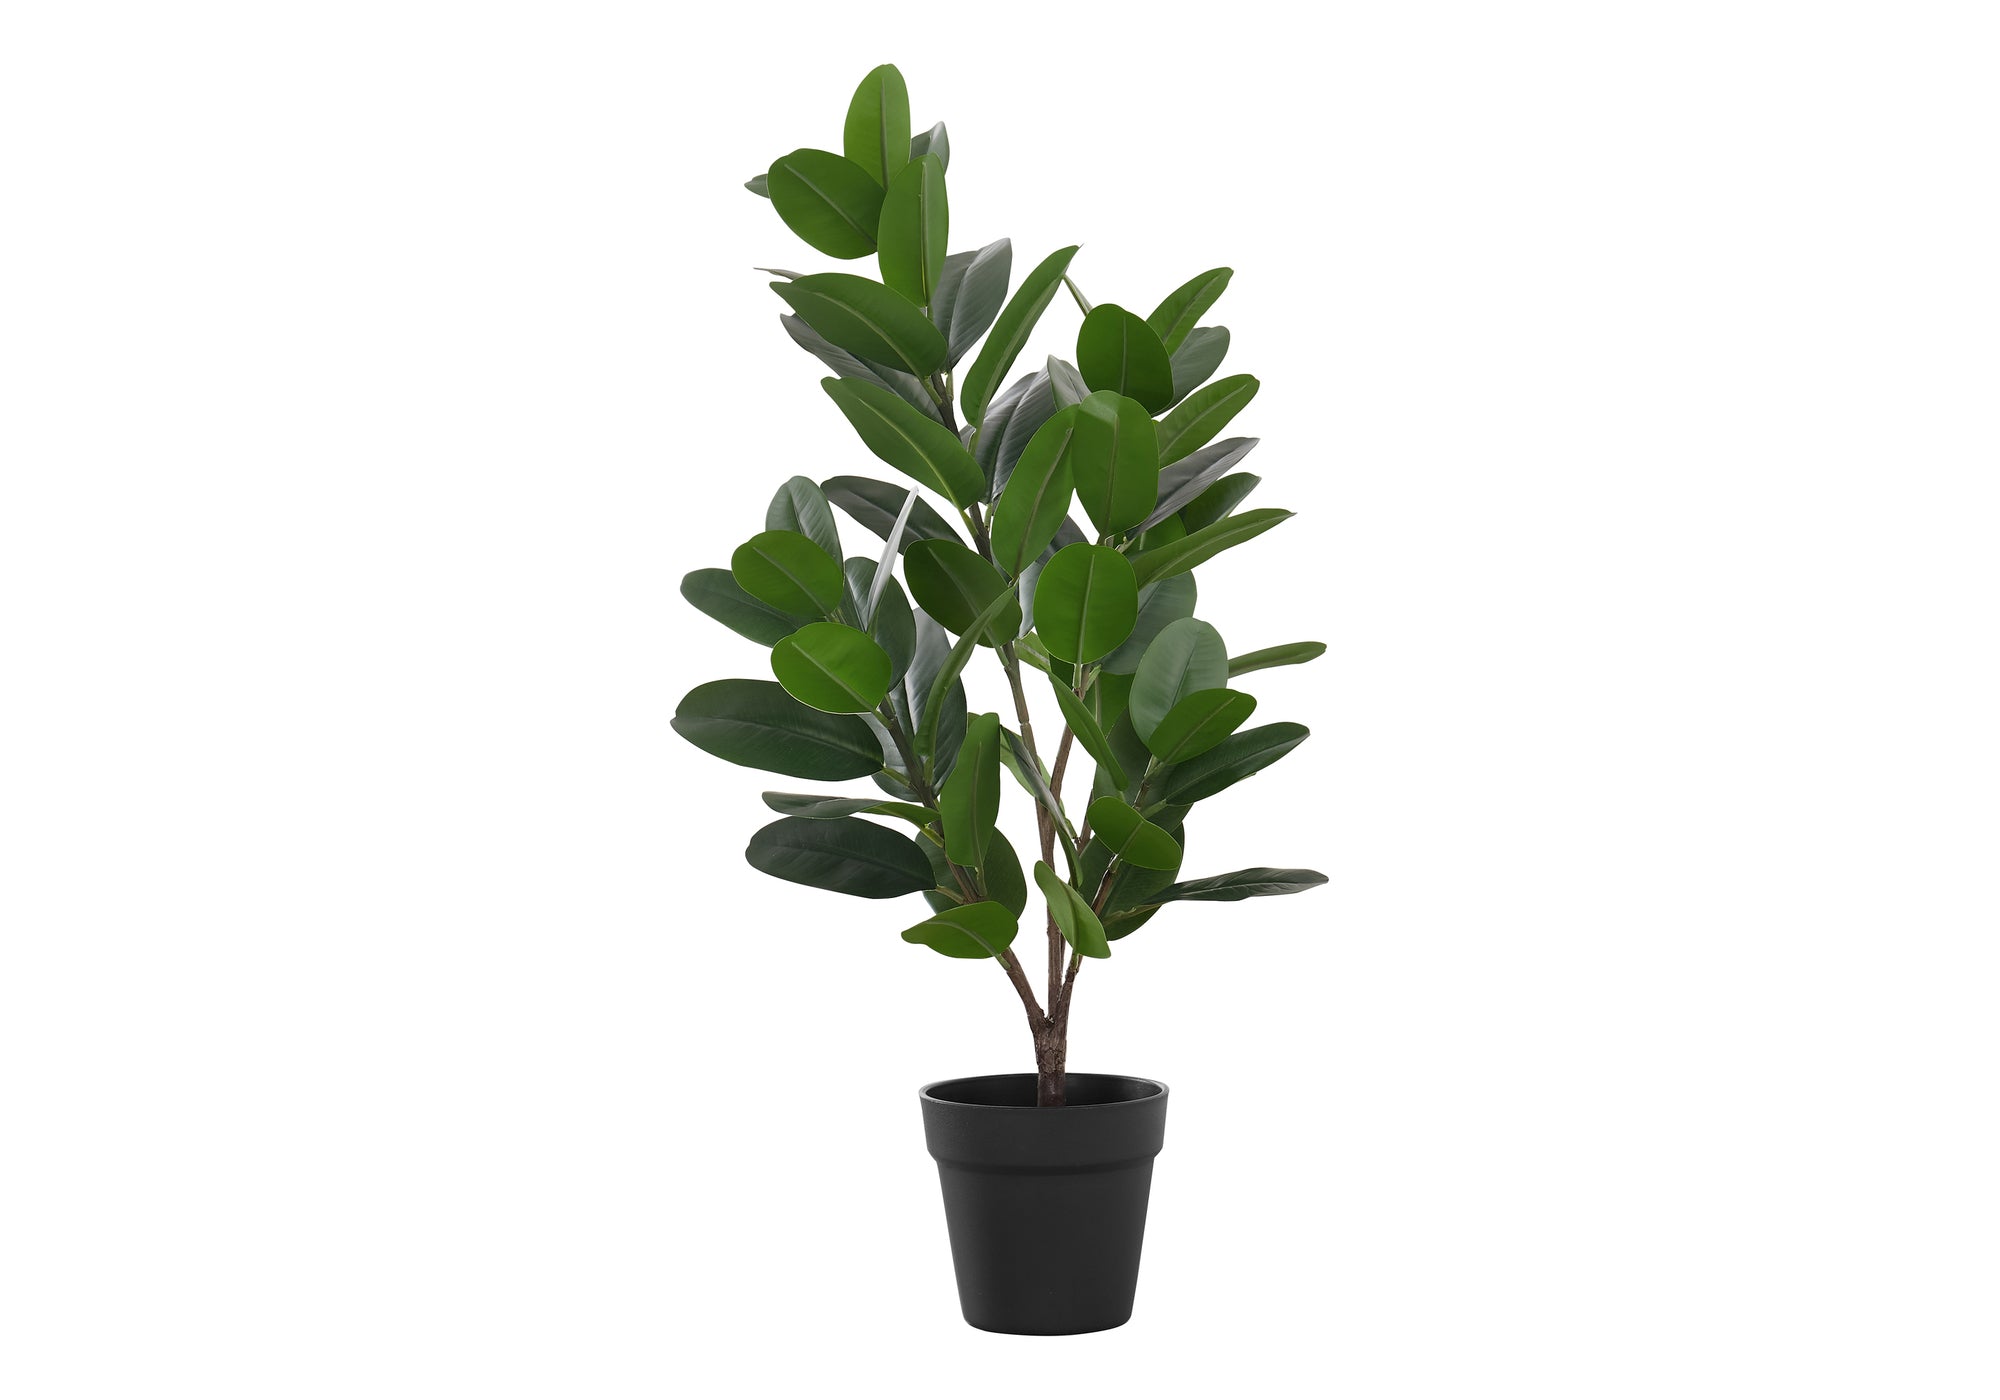 MN-259504    Artificial Plant, 28" Tall, Garcinia Tree, Indoor, Faux, Fake, Floor, Greenery, Potted, Real Touch, Decorative, Green Leaves, Black Pot